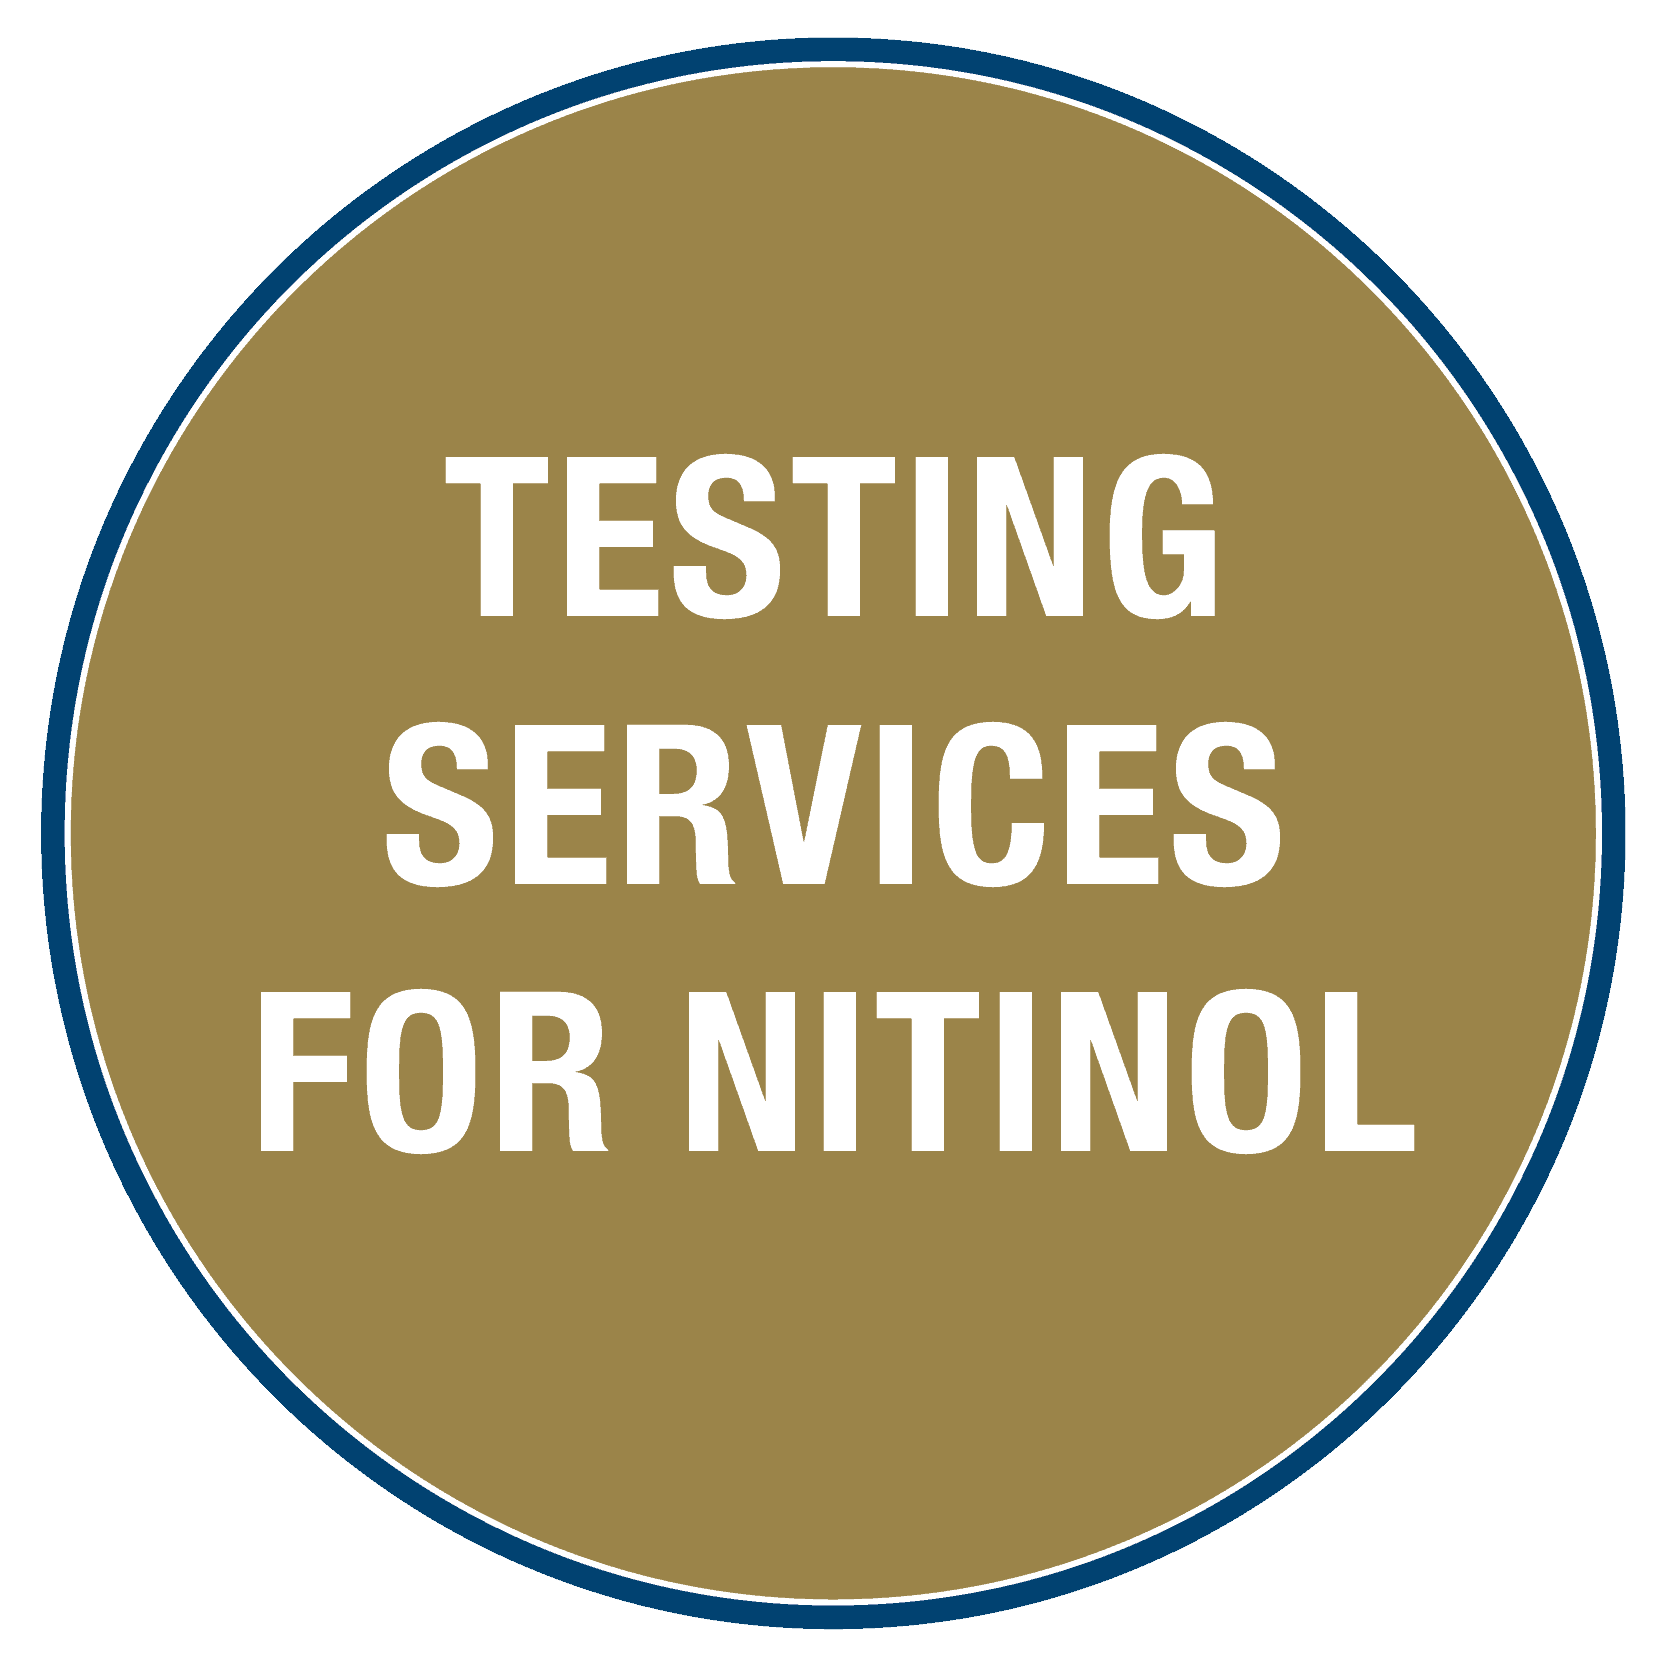 Testing Services for Nitinol